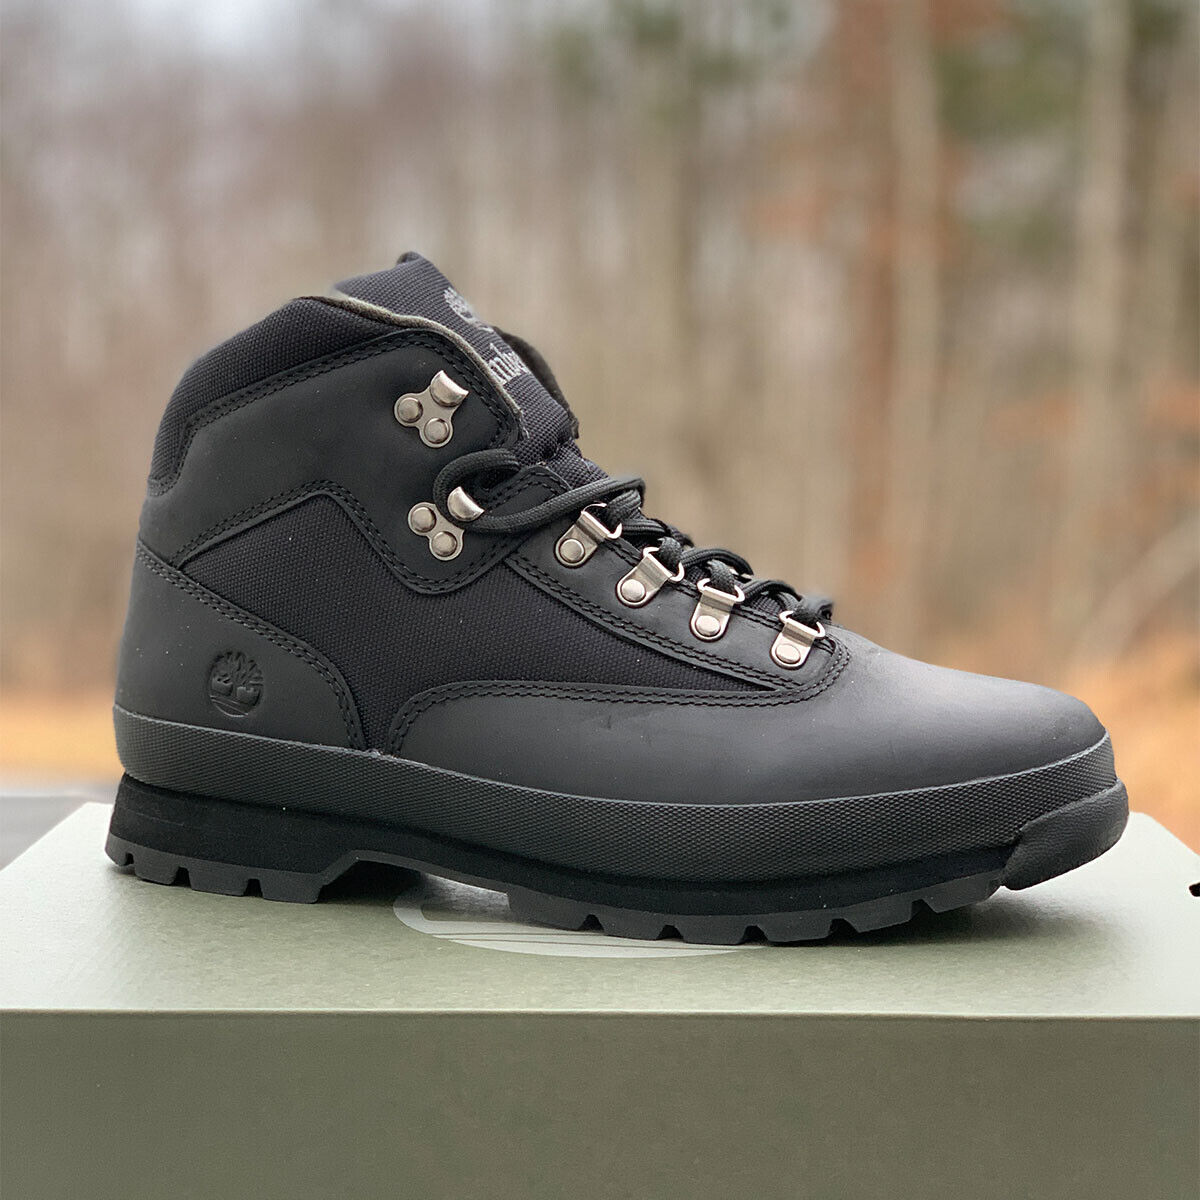 Euro Hiker Black Leather Hiking Boots 